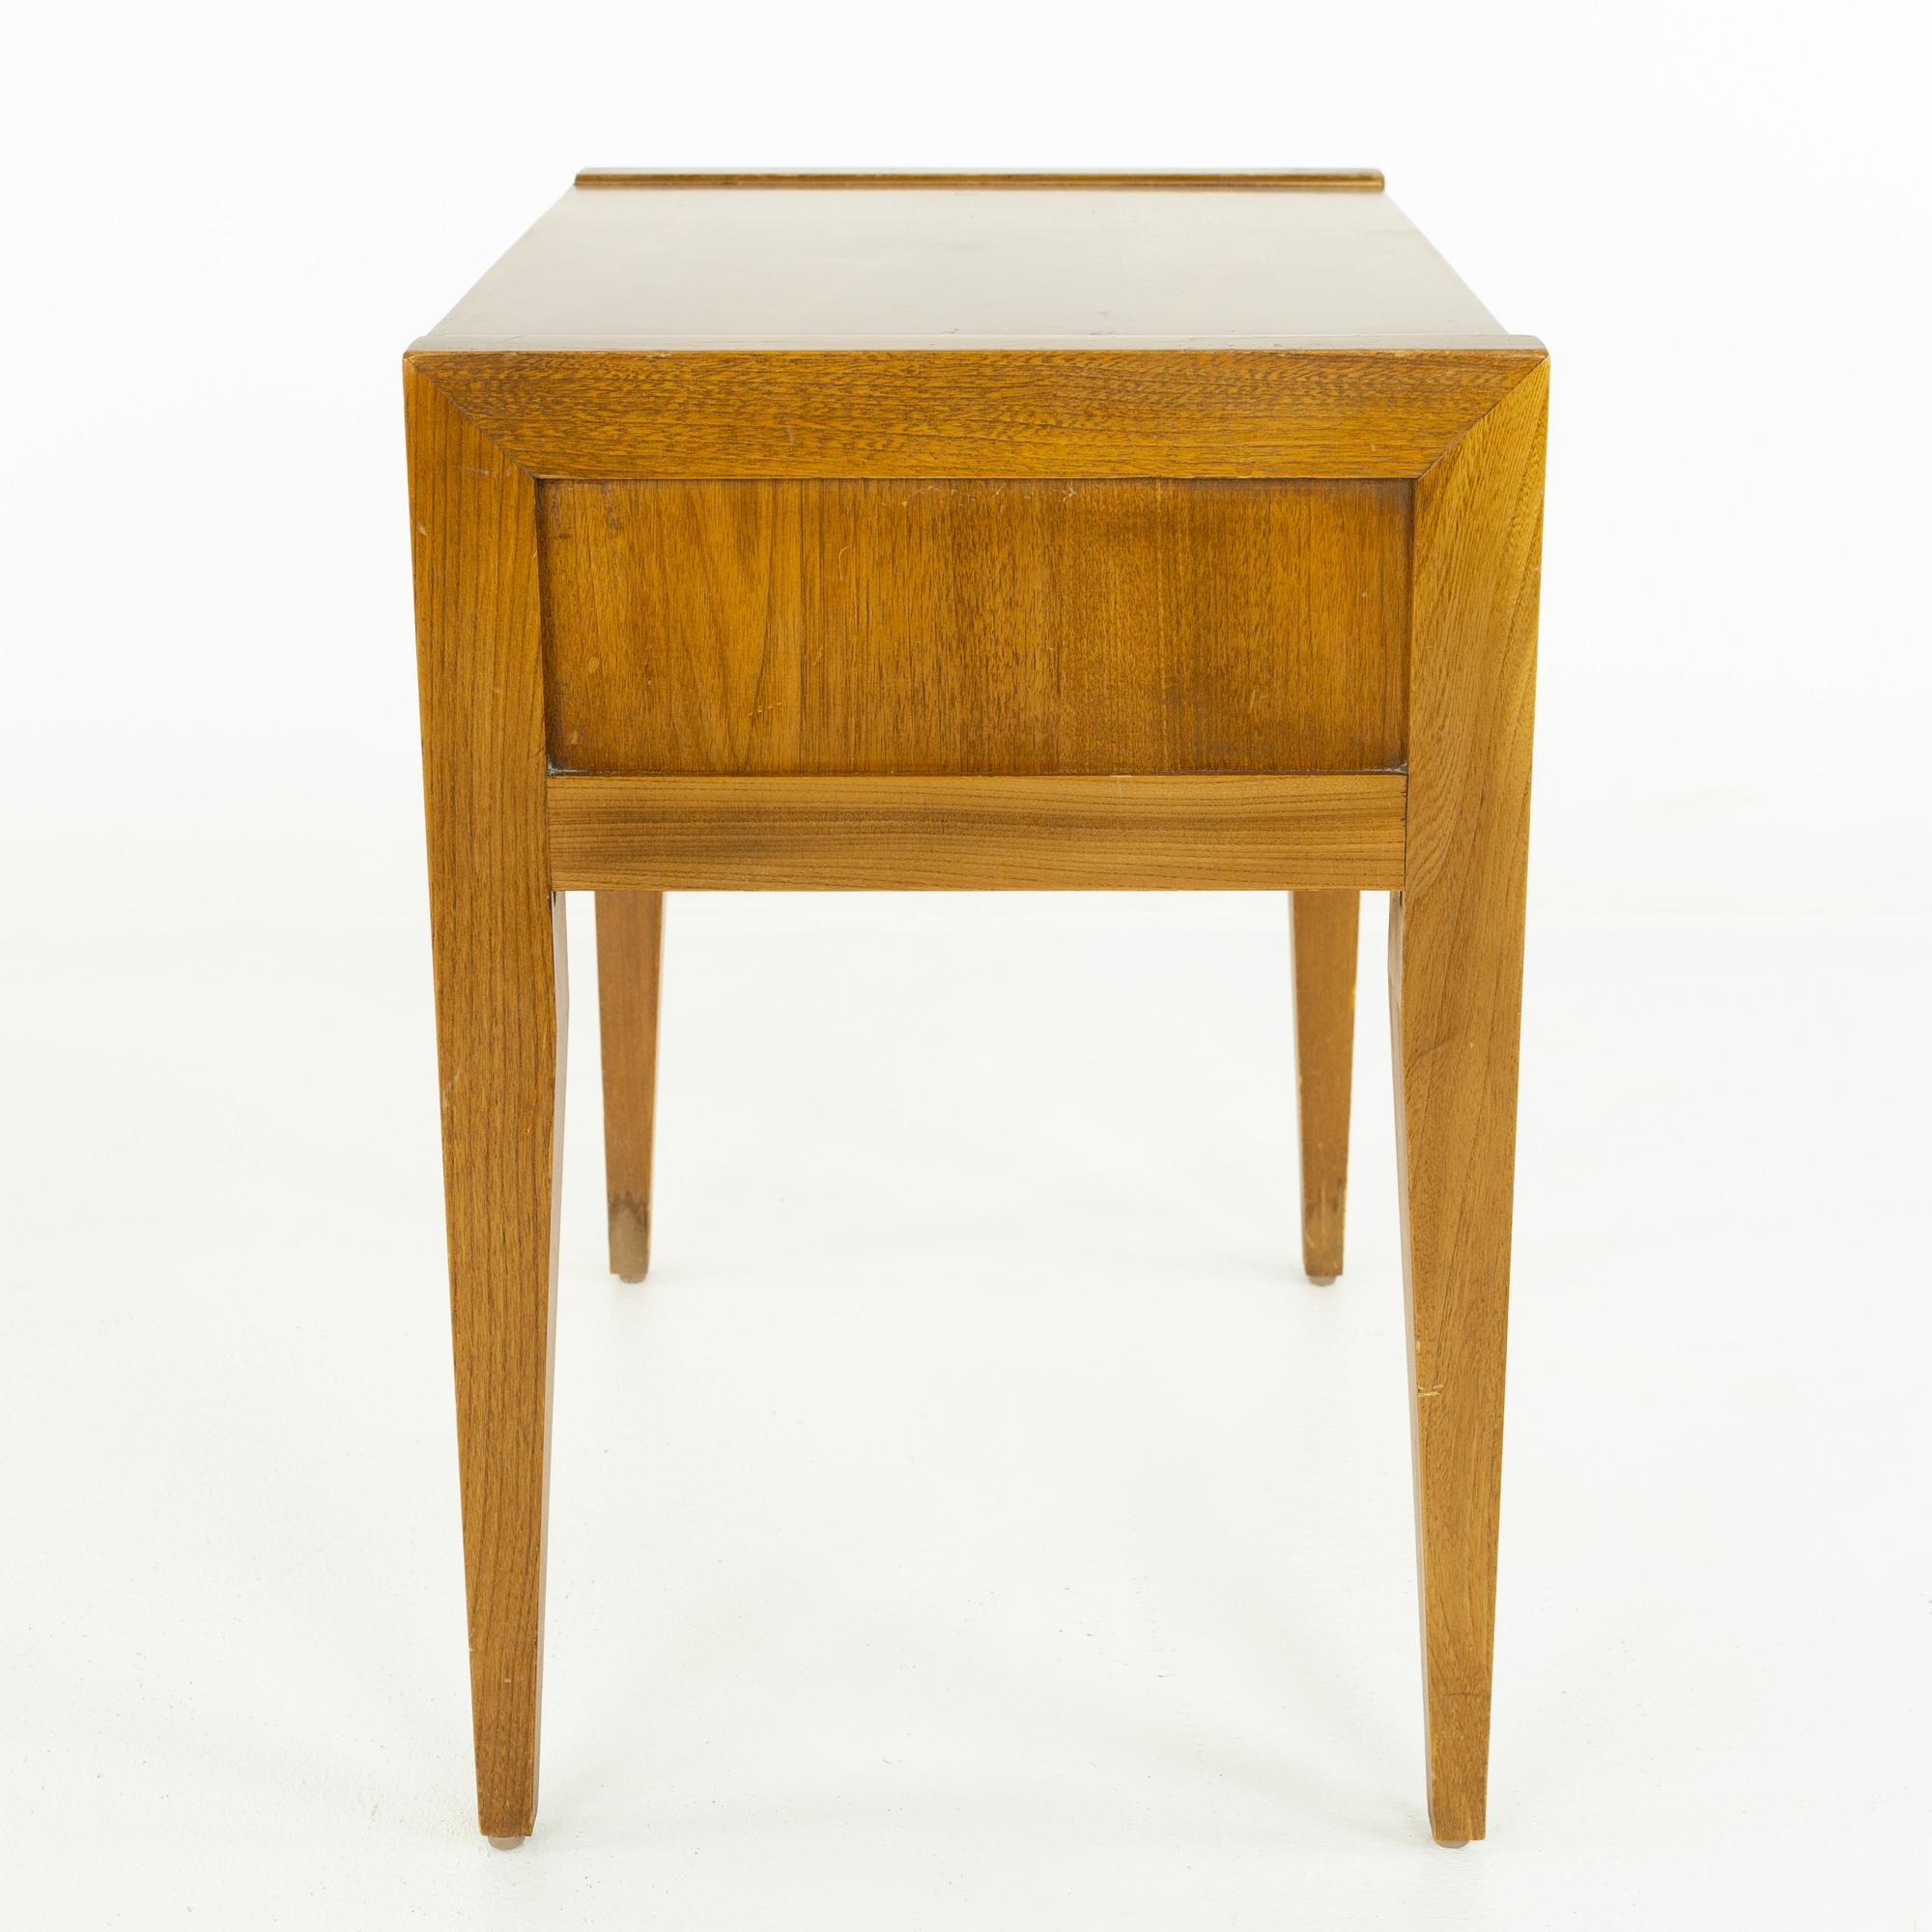 Basic Witz Mid Century Walnut Nightstands, Pair In Good Condition For Sale In Countryside, IL